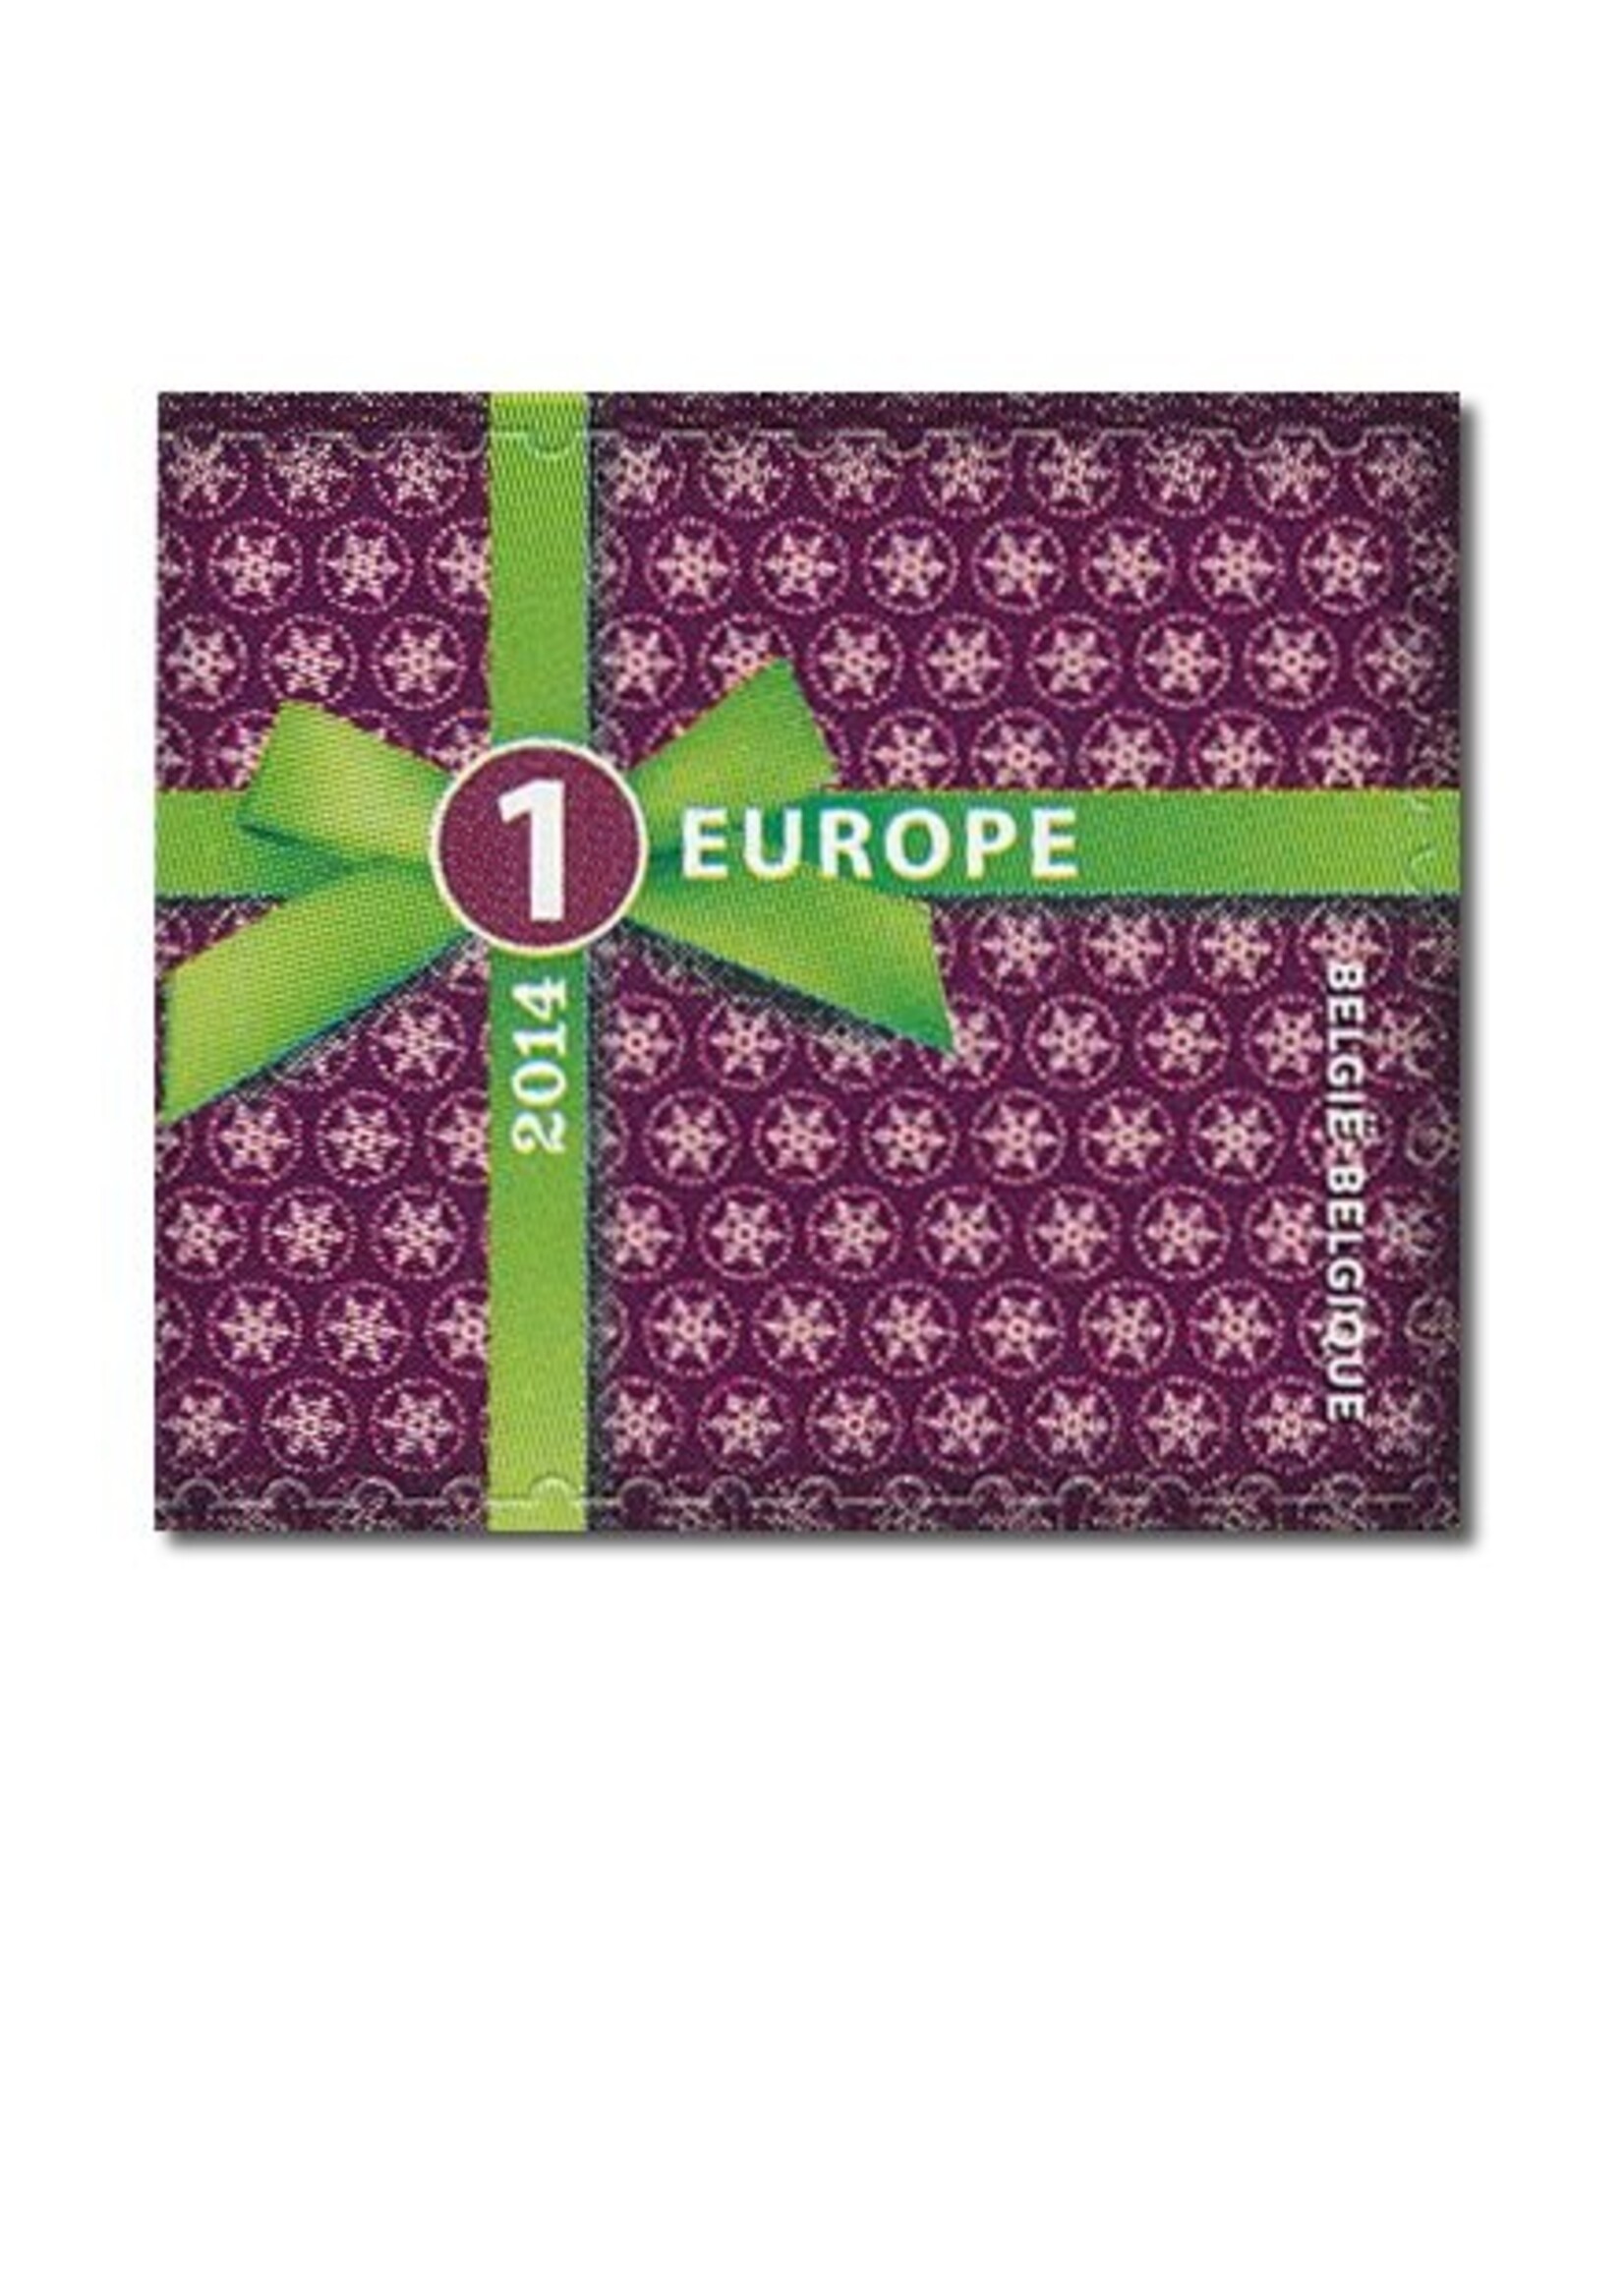 Europe Christmas - Booklet with 10 stamps - Rate 1